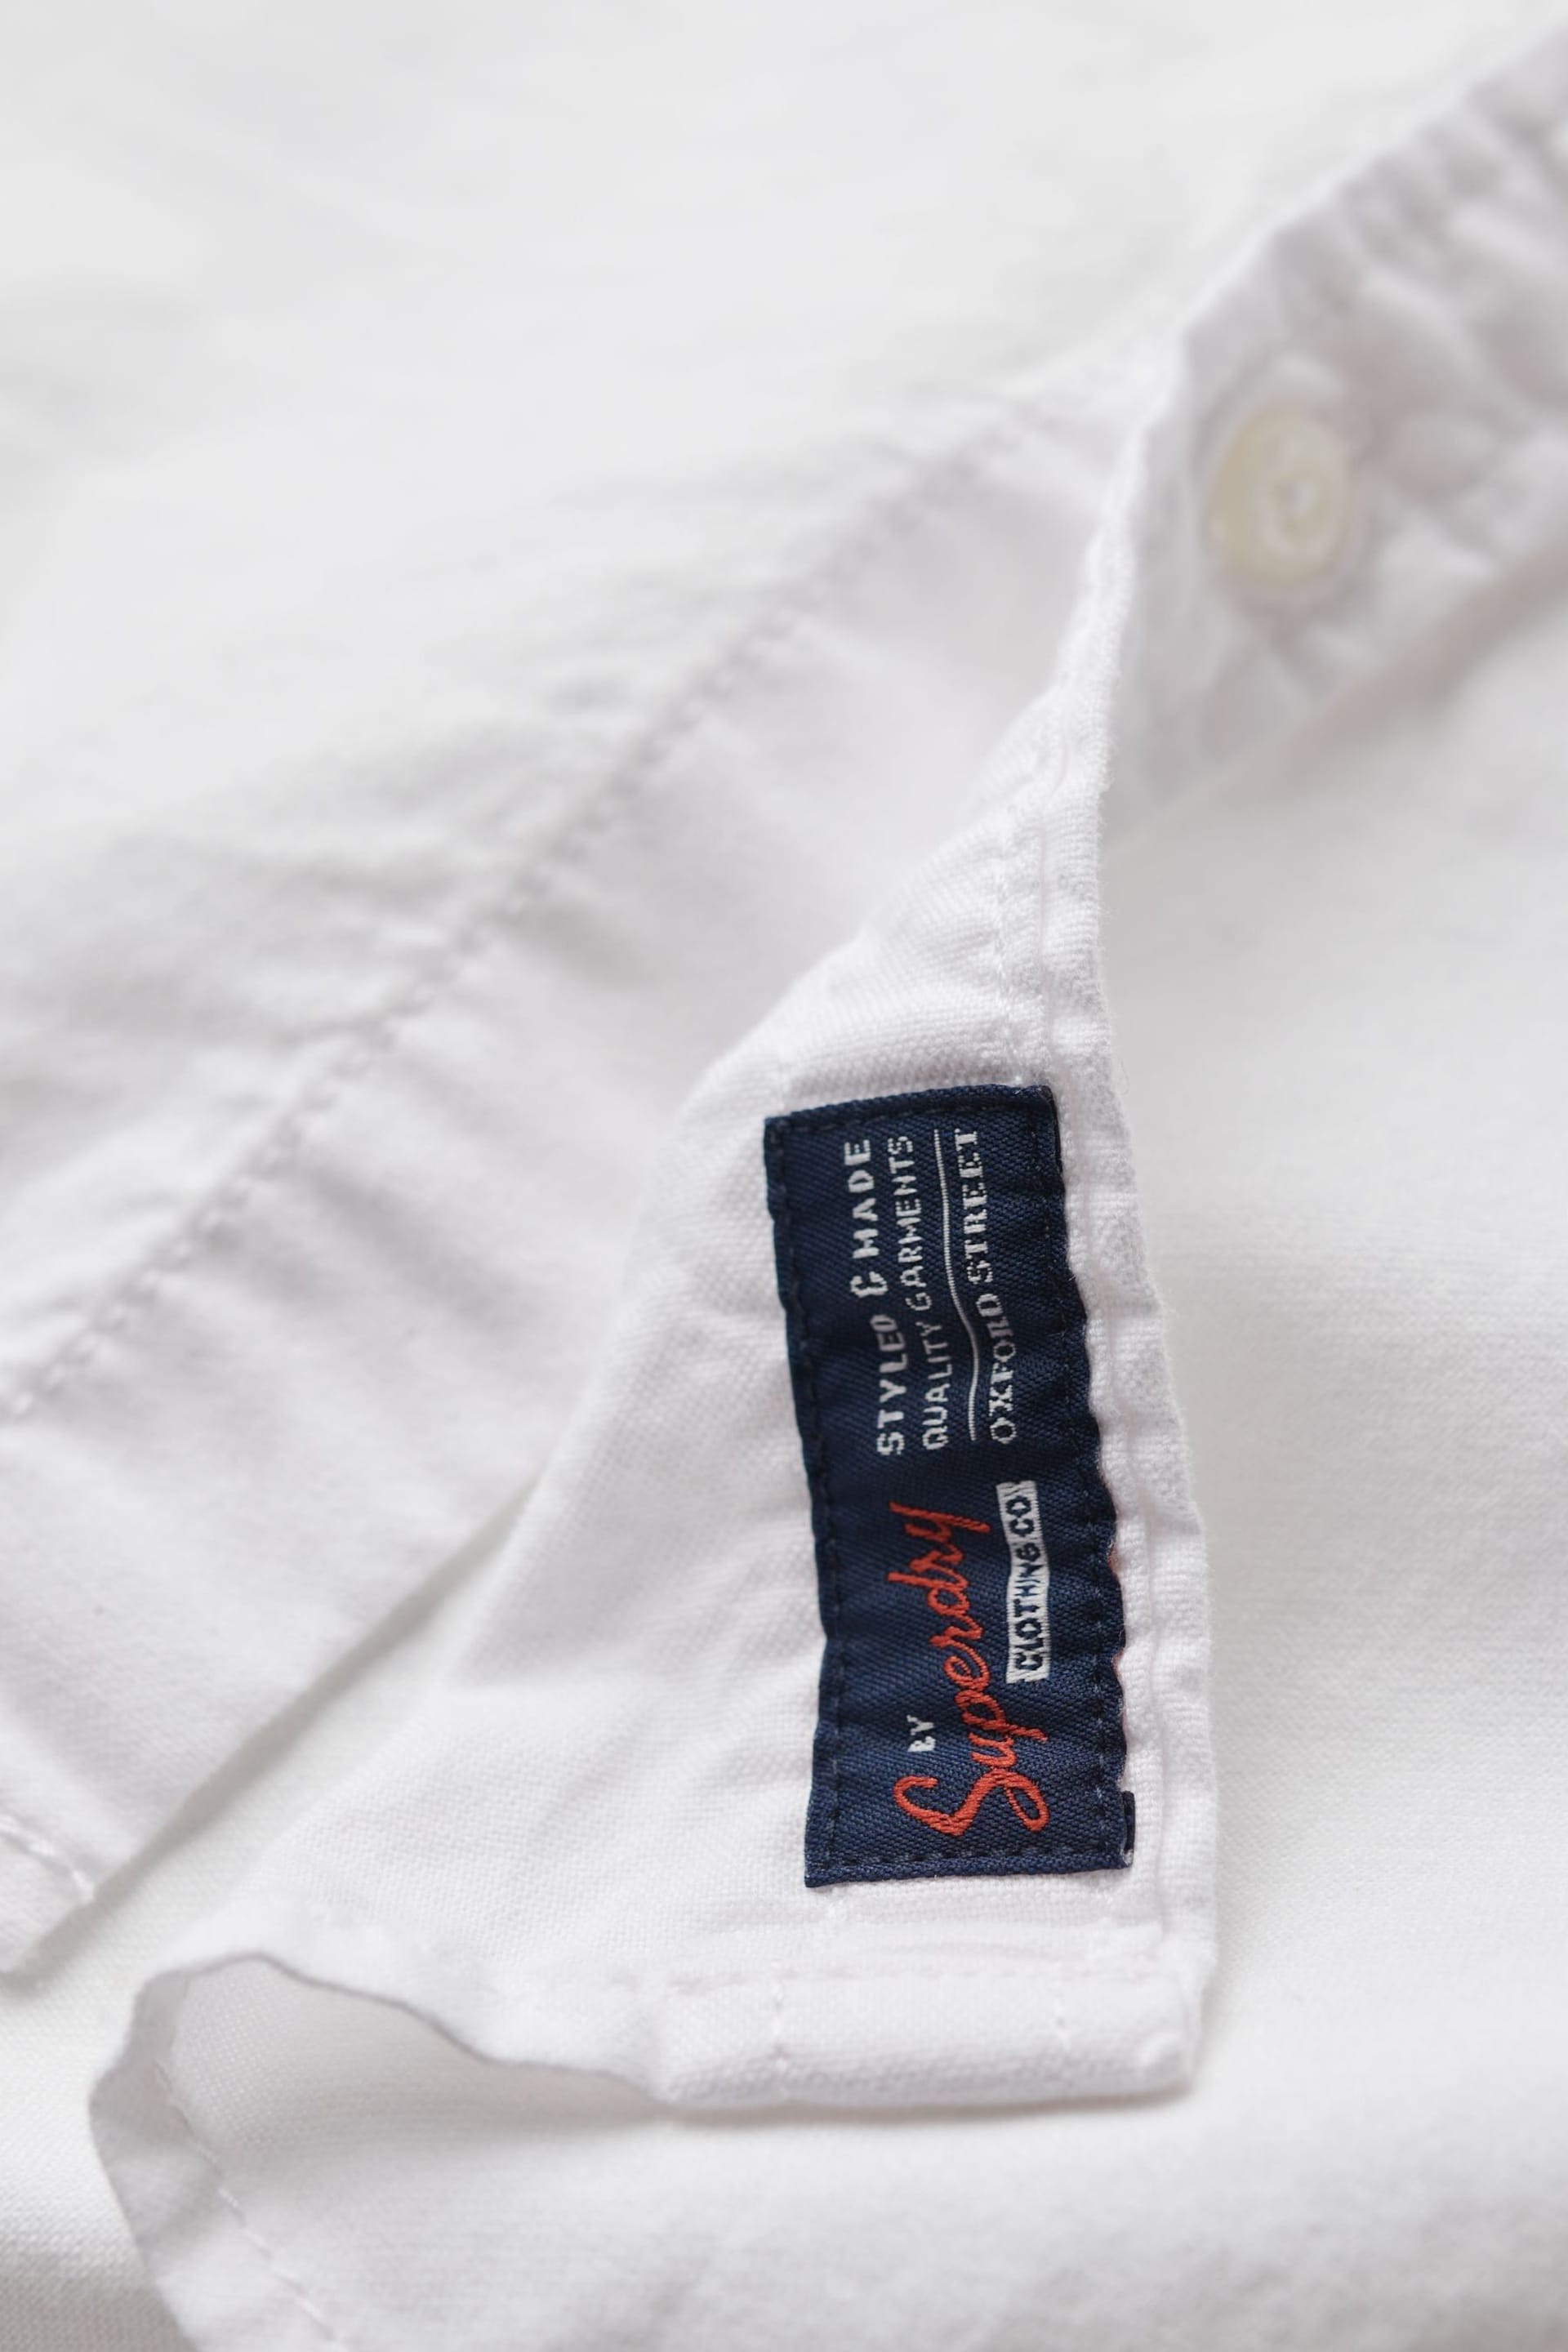 Superdry White Cotton Long Sleeved Oxford Shirt - Image 3 of 6